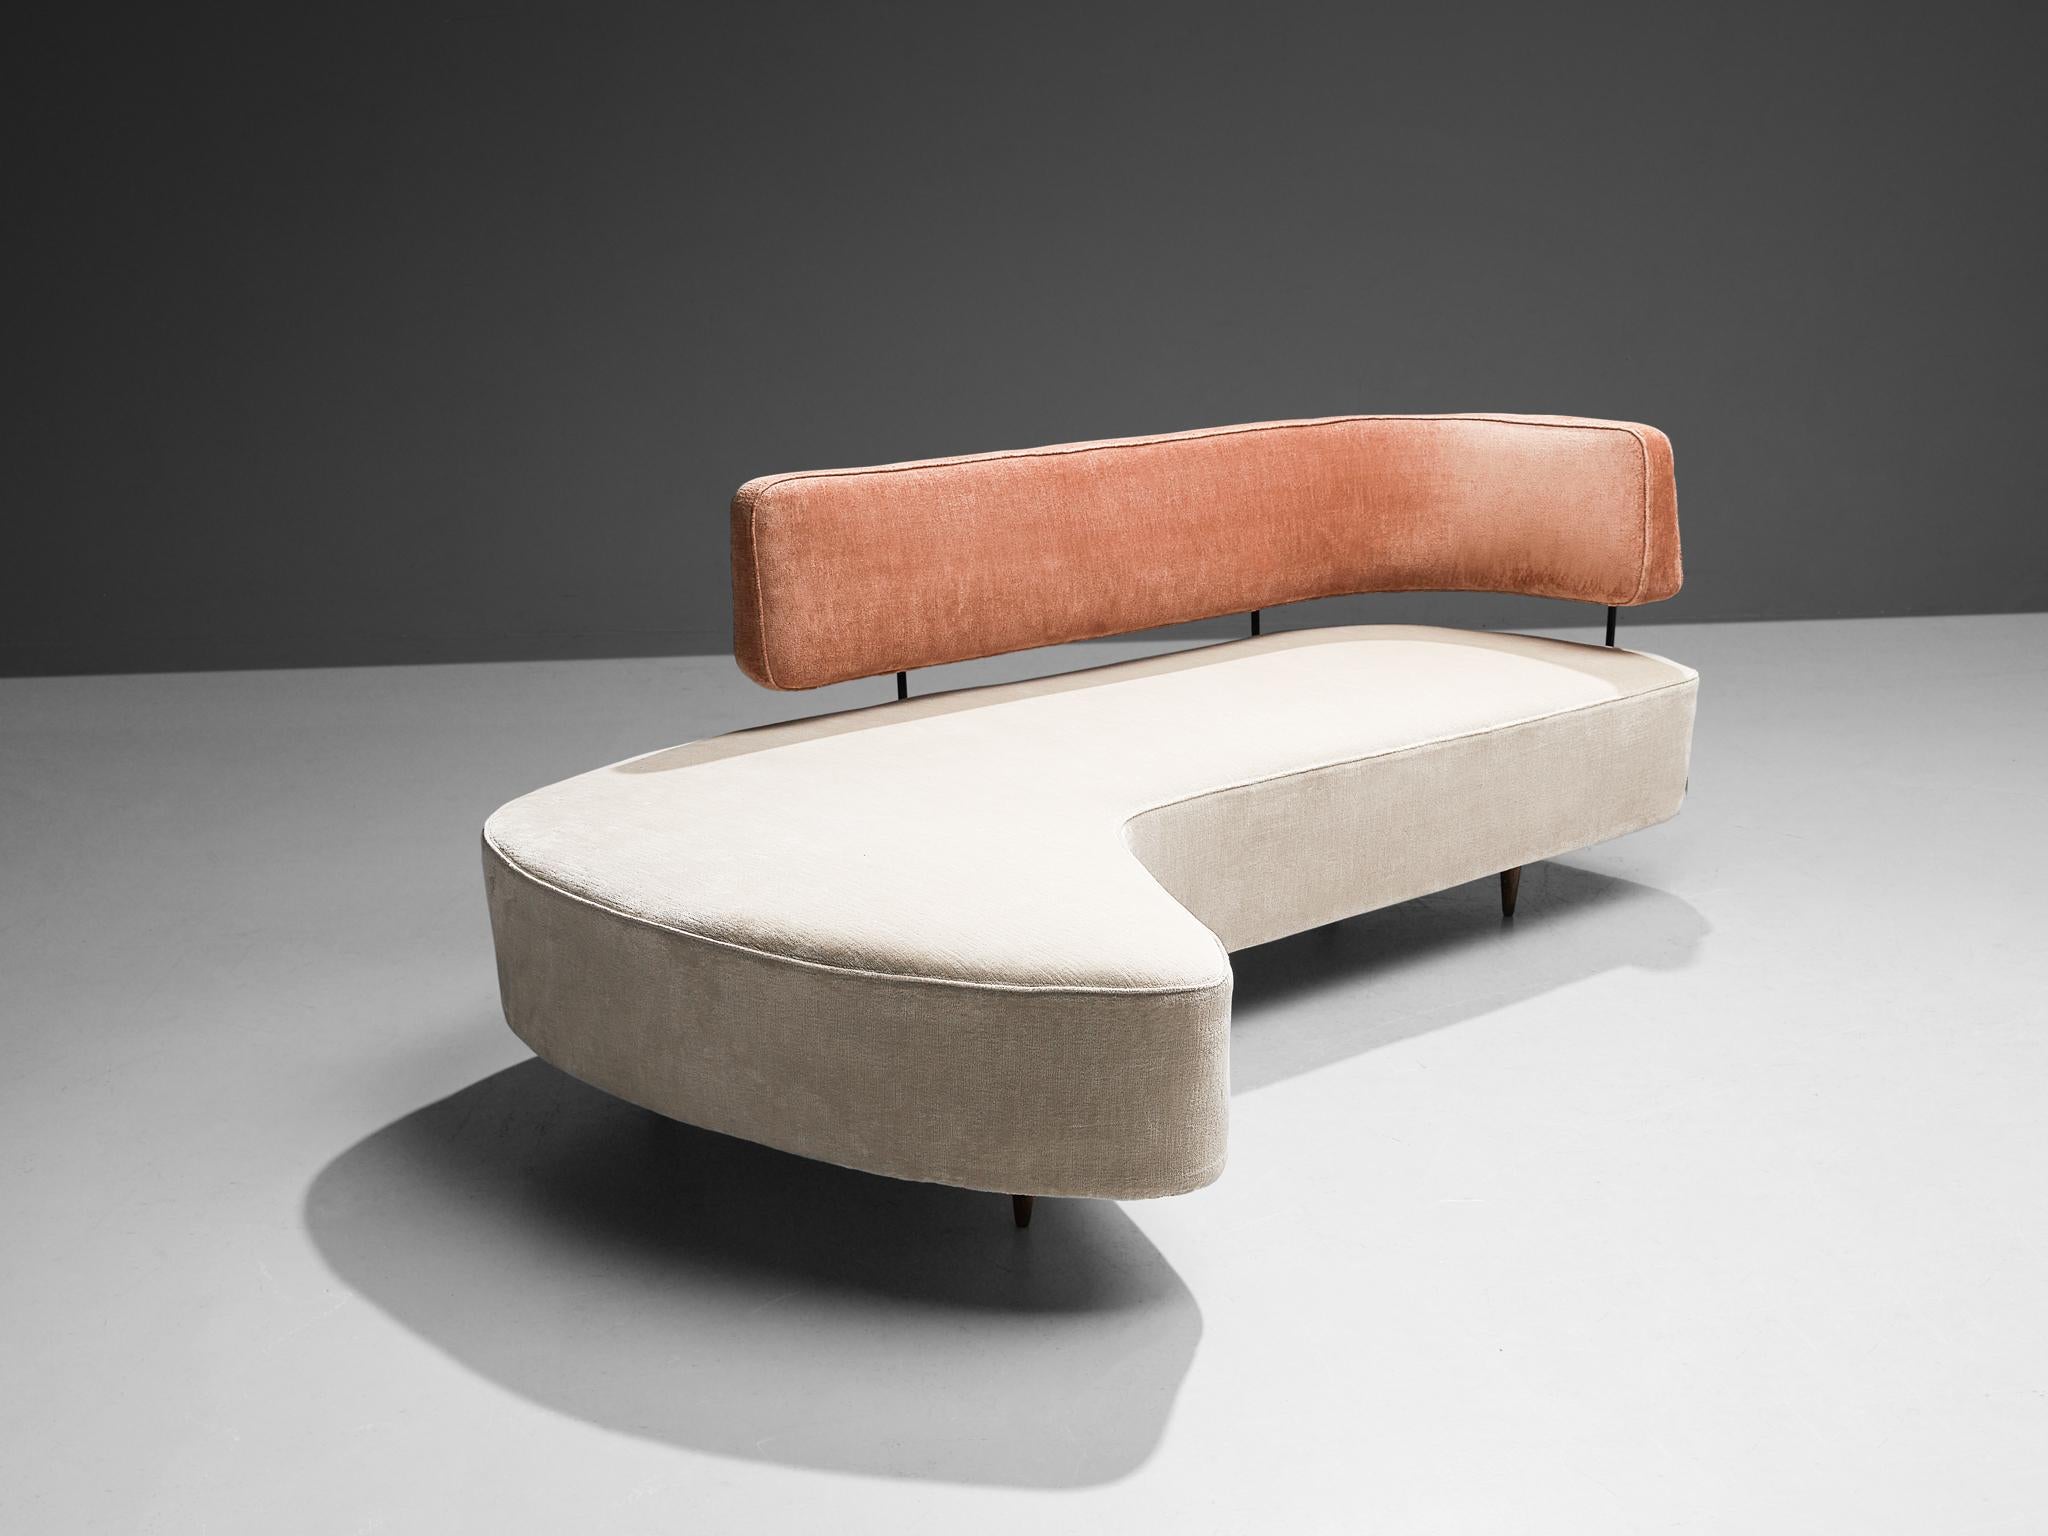 Taichiro Nakay (Nakai) for La Permanente Mobili, sofa, wood, painted metal, fabric, Italy, 1955. 

Rare free-form sofa designed by Japanese designer Taichiro Nakay and presented at the Selettiva del Mobili competition in Cantù. In his designs, Nakay